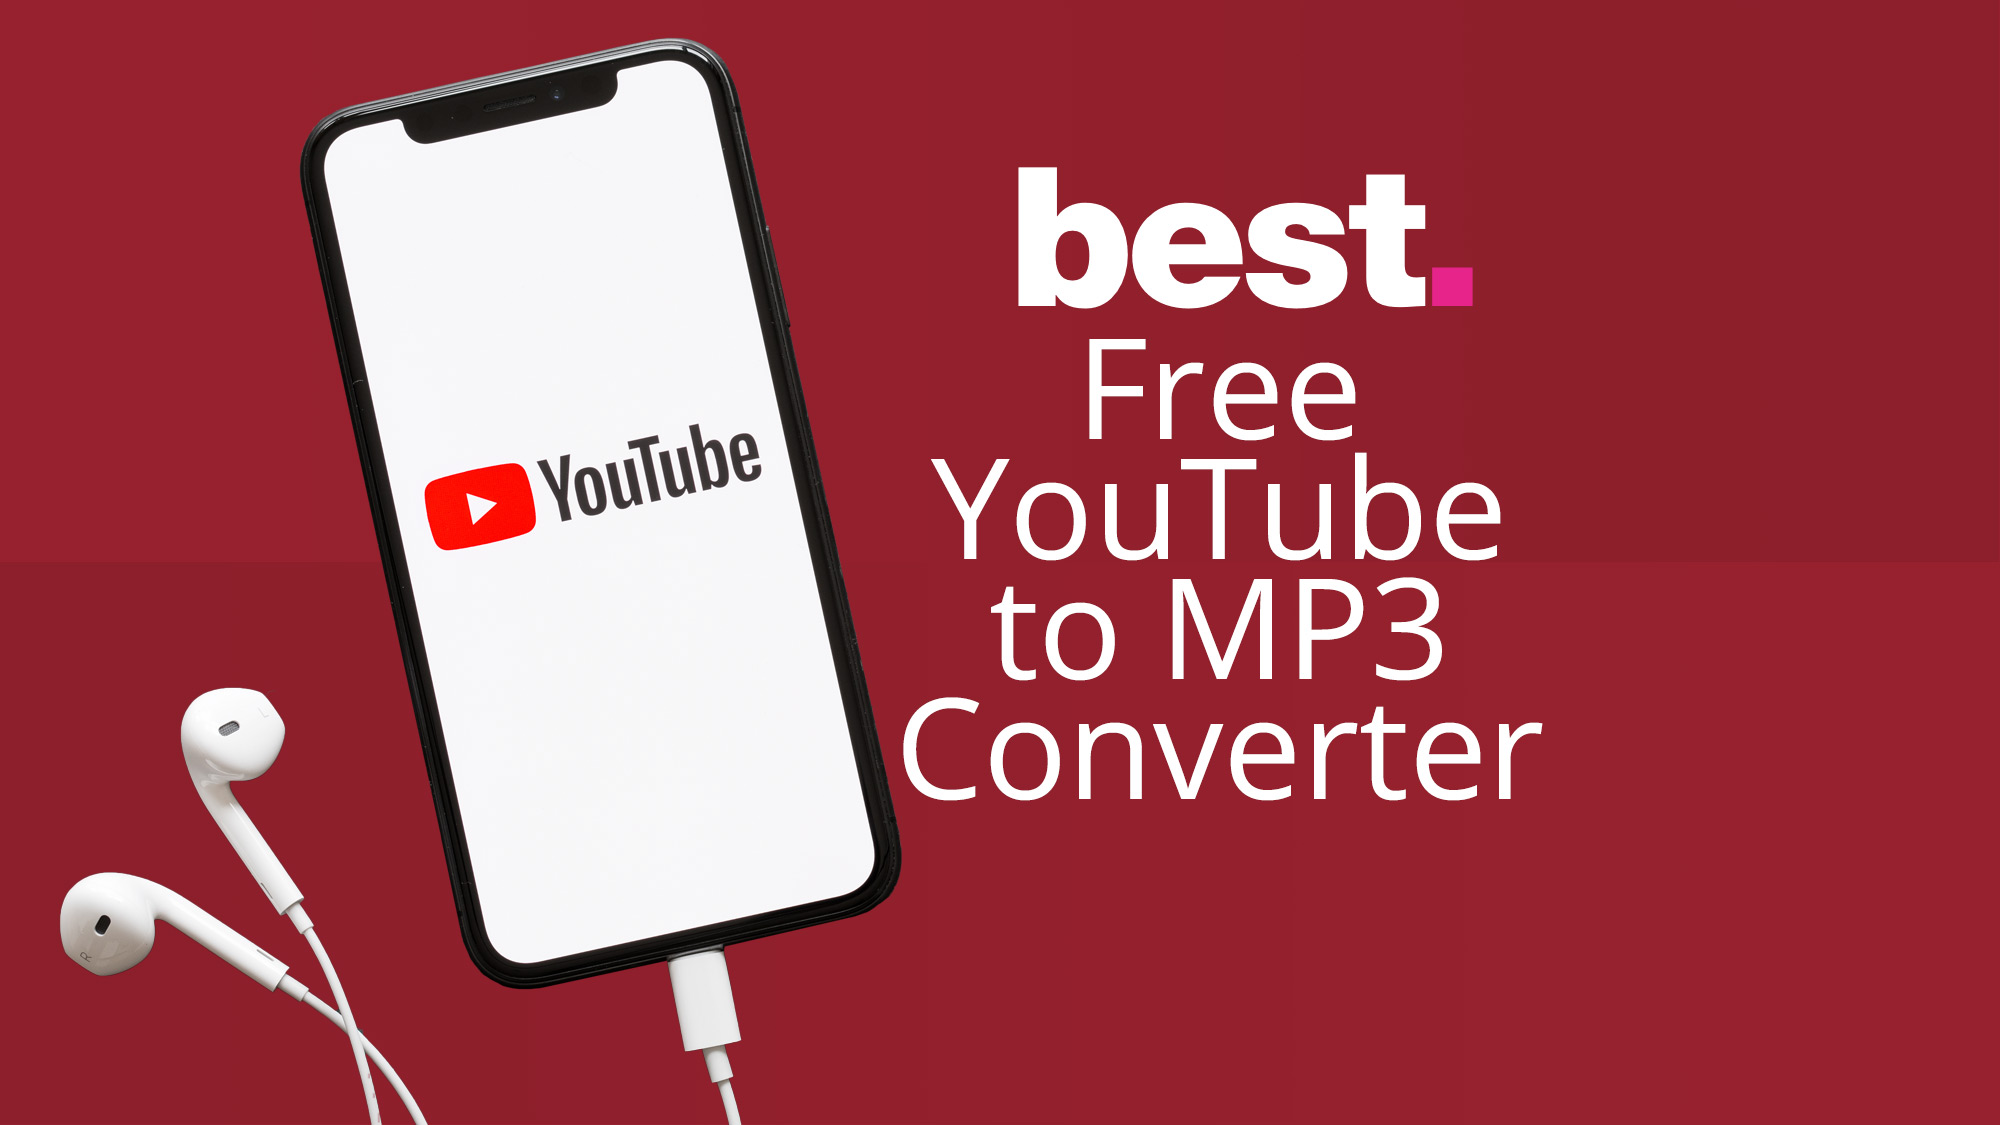 youtube link to mp3 converter